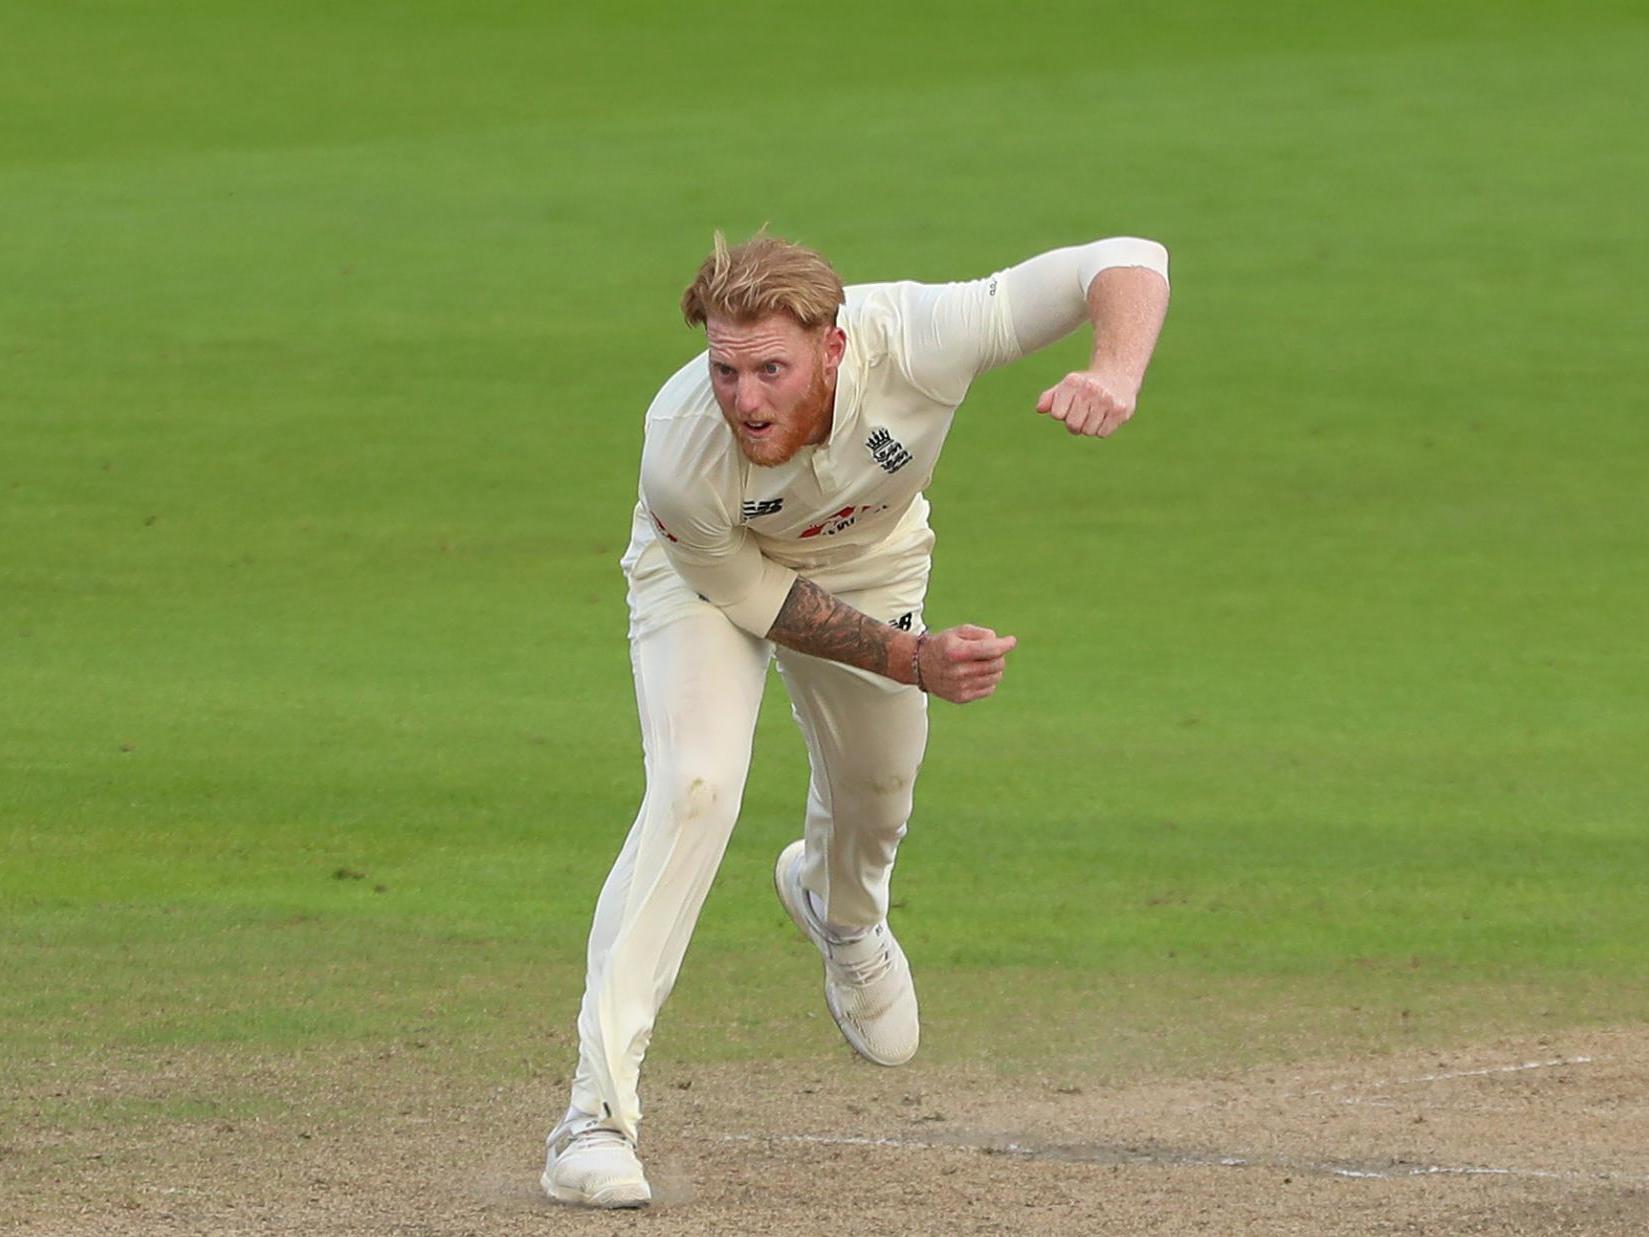 England vs Pakistan: Ben Stokes to miss remainder of Test series for family reasons